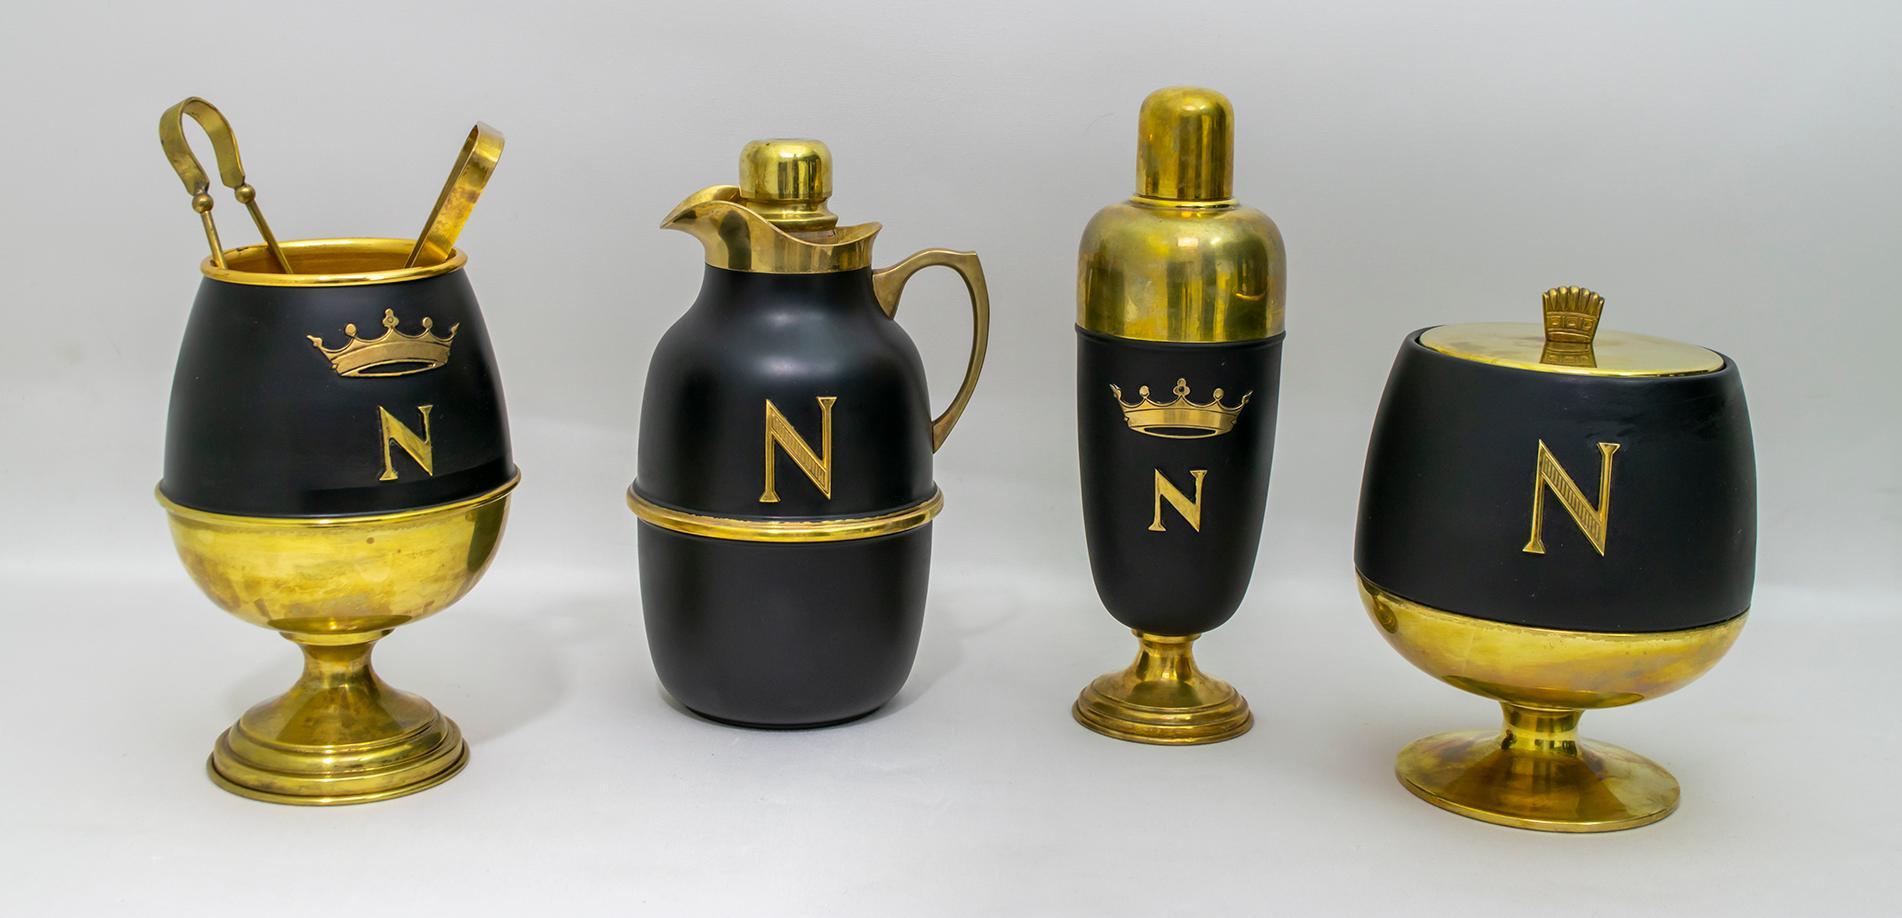 This cocktail set in brass and black lacquered brass was designed by Aldo Tura Macabo for Napoleon Cognac and produced in Italy by standard by Cusano Milanino. The set includes a bucket for ice pliers, a thermos, a cocktail shaker and an ice bucket.